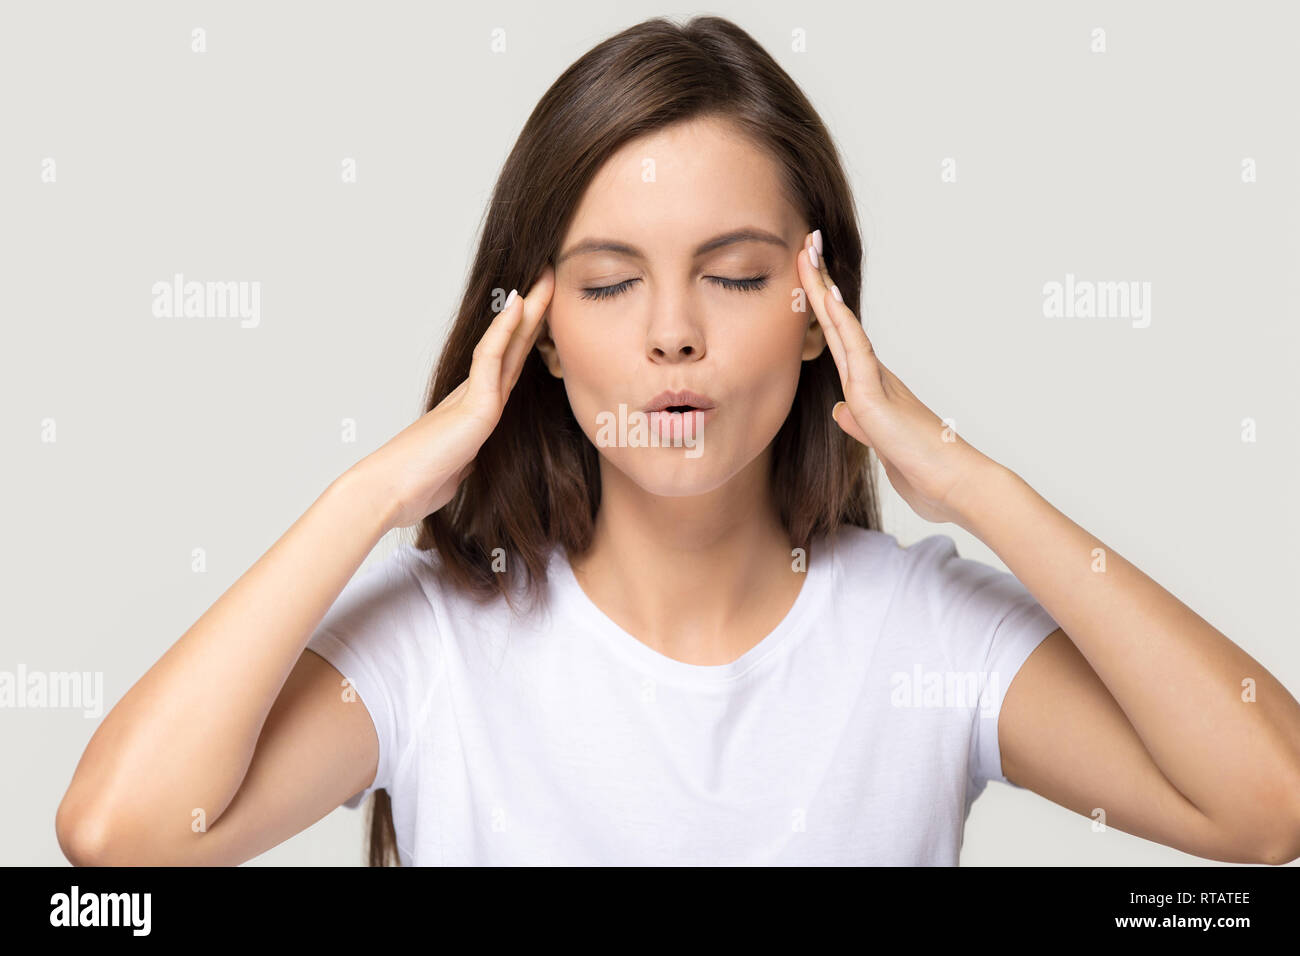 Stressed teen girl calming down massaging temples isolated on background Stock Photo